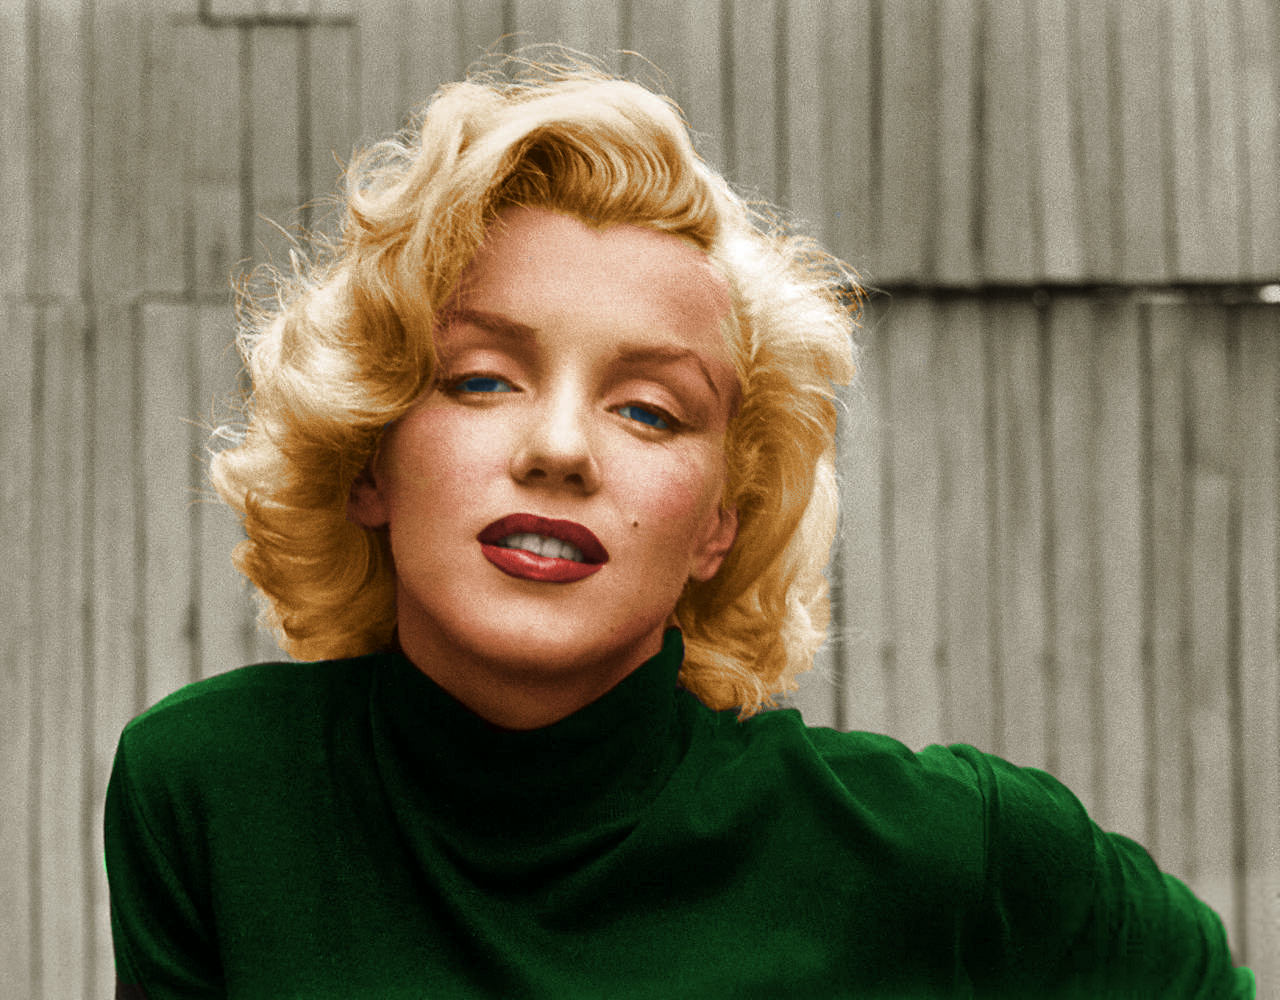 Colorized from this Shorpy original. Hollywood, 1953. "Actress Marilyn Monroe, playfully elegant at home." 35mm negative by Alfred Eisenstaedt, Life photo archive. View full size.